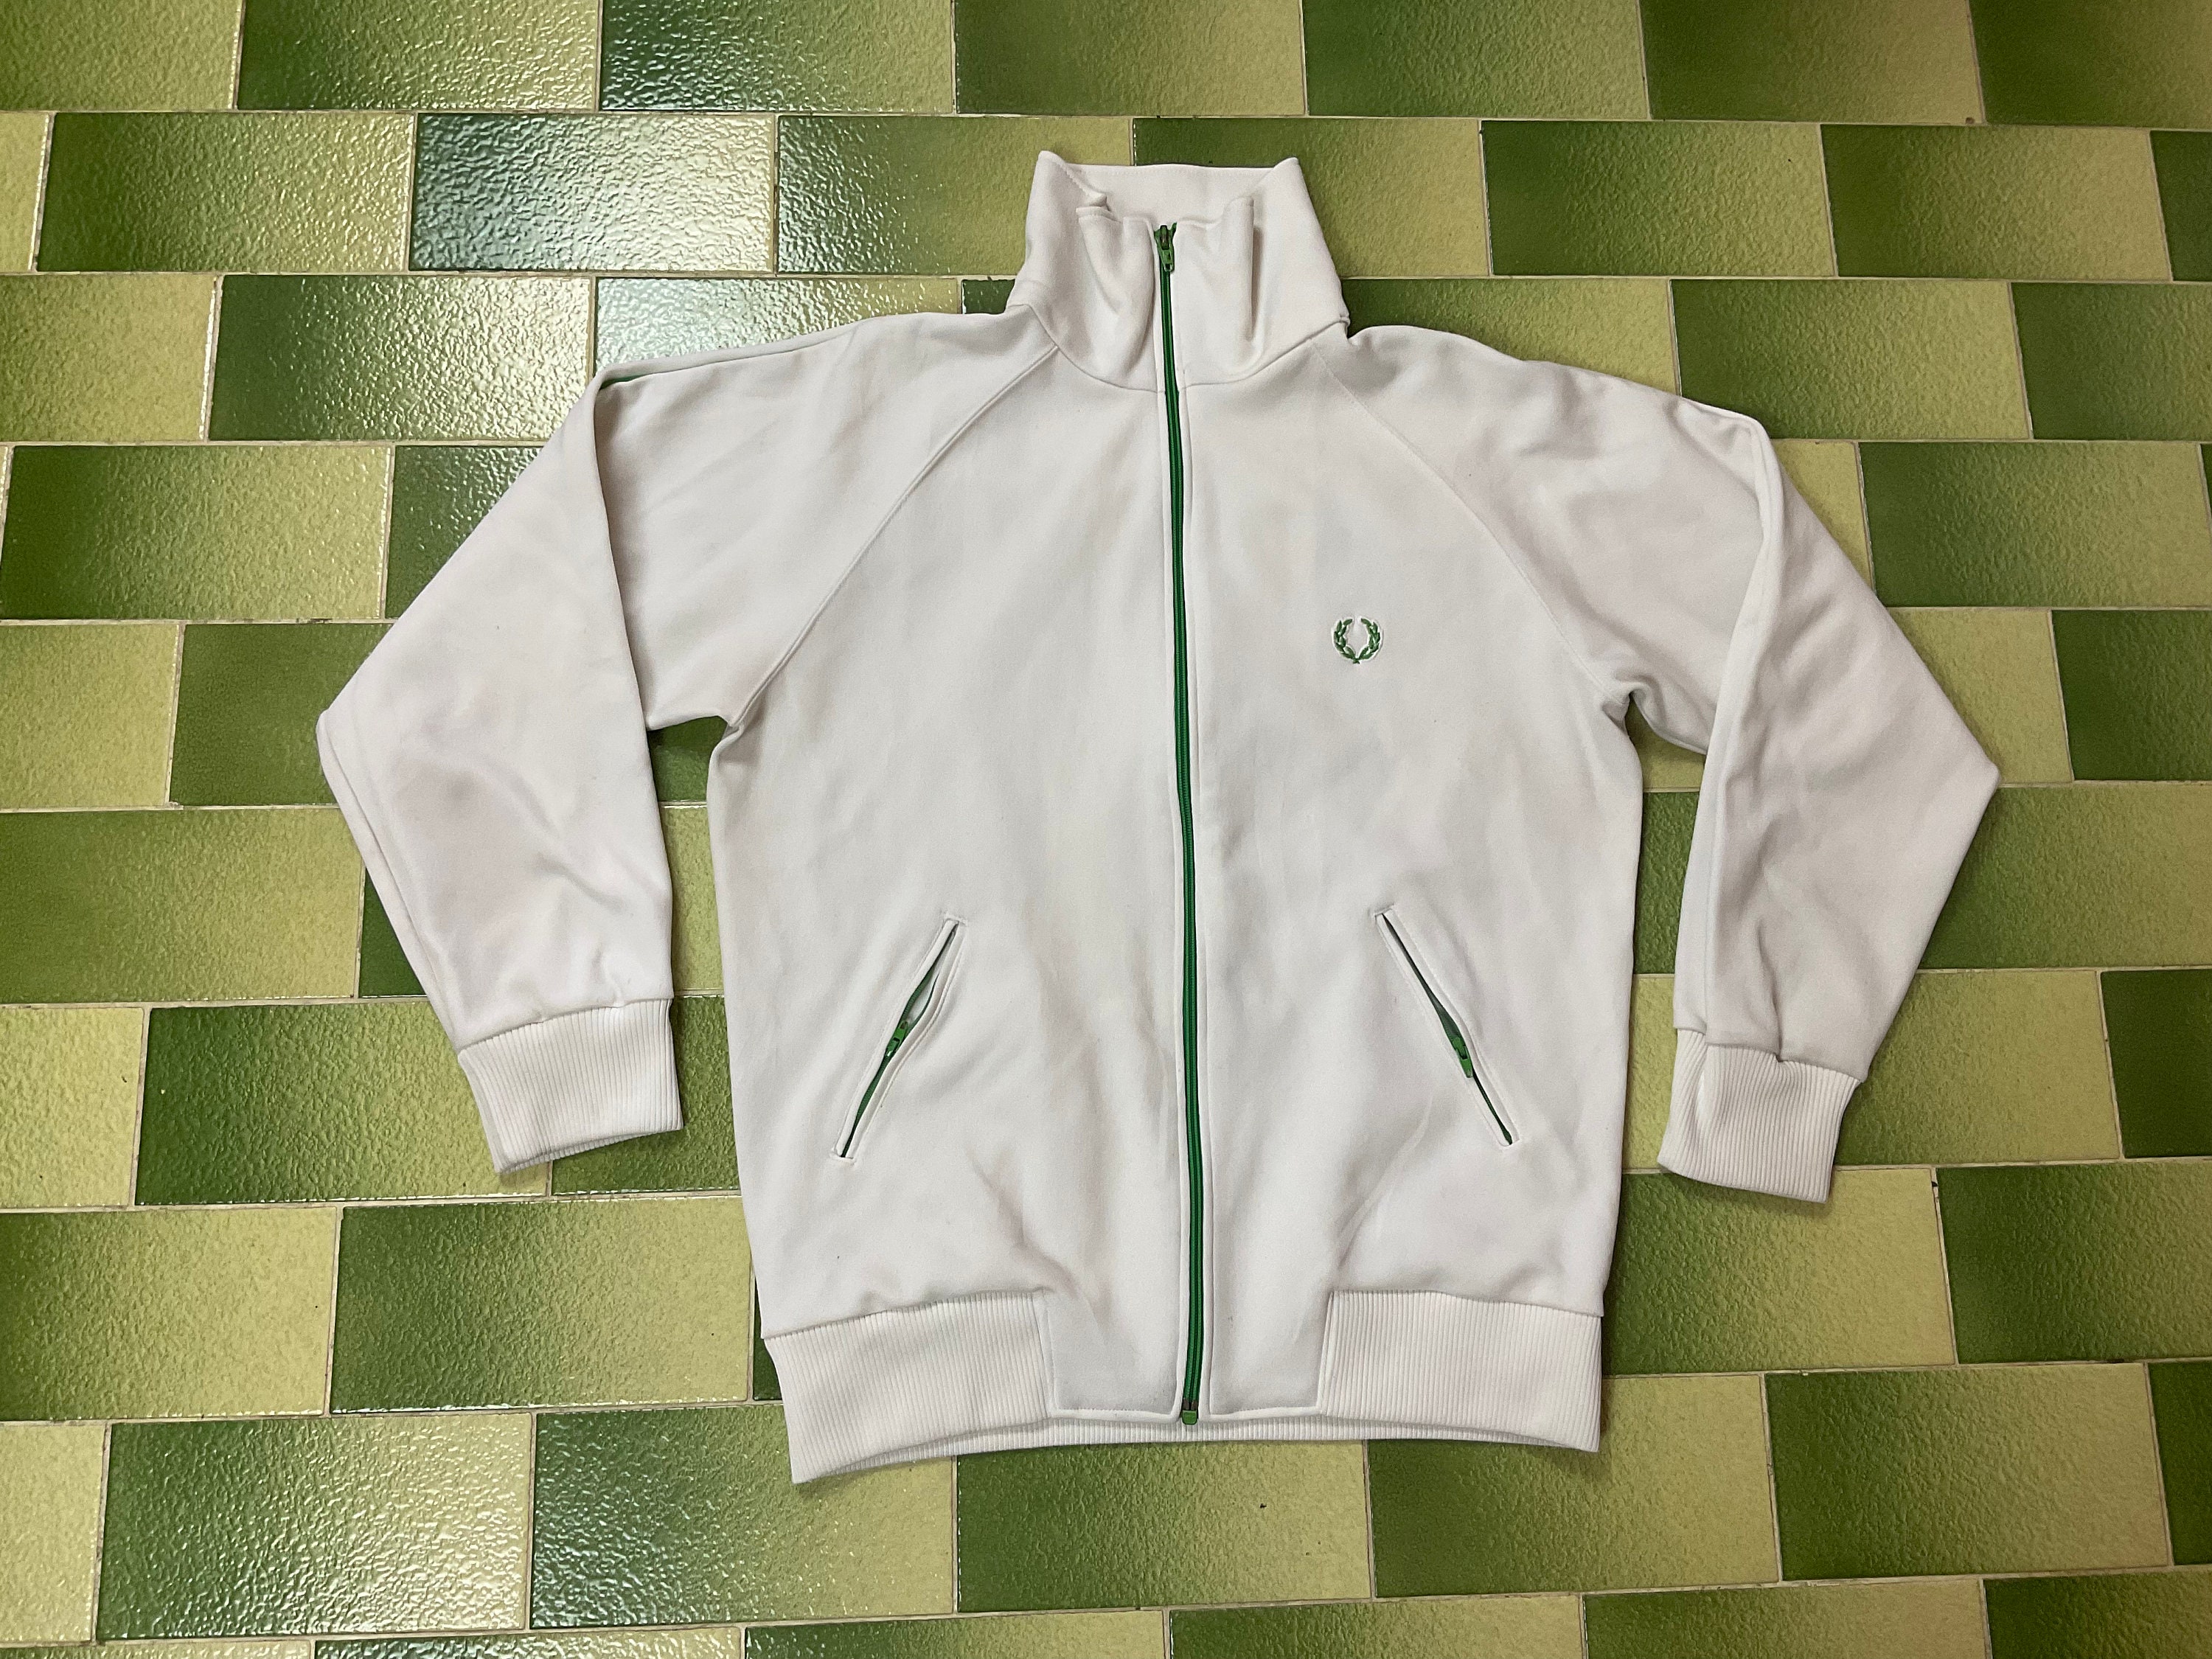 Vintage 90s Fred Perry Sports Wear Track Top Jacket Full-zip Waist